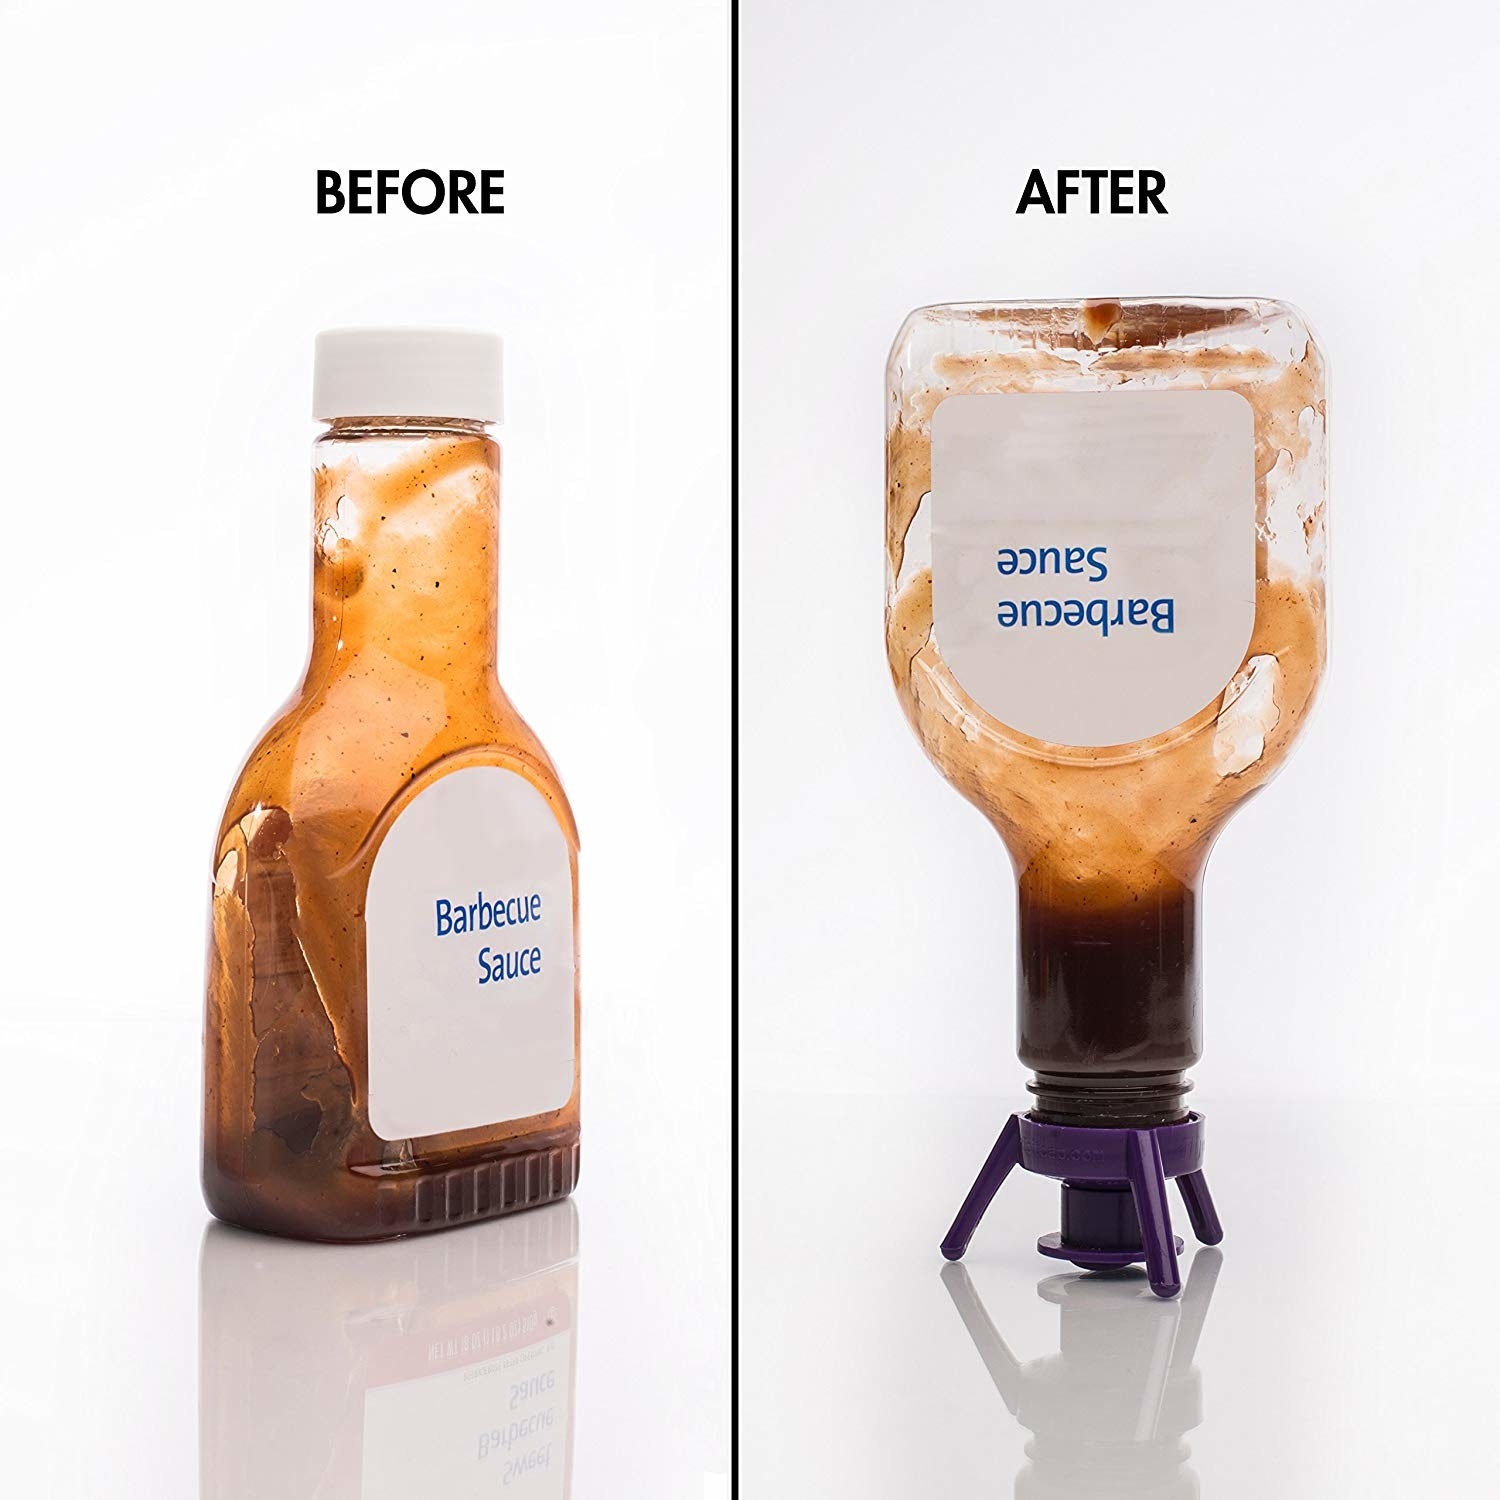 A bottle of barbecue sauce with and without the kit